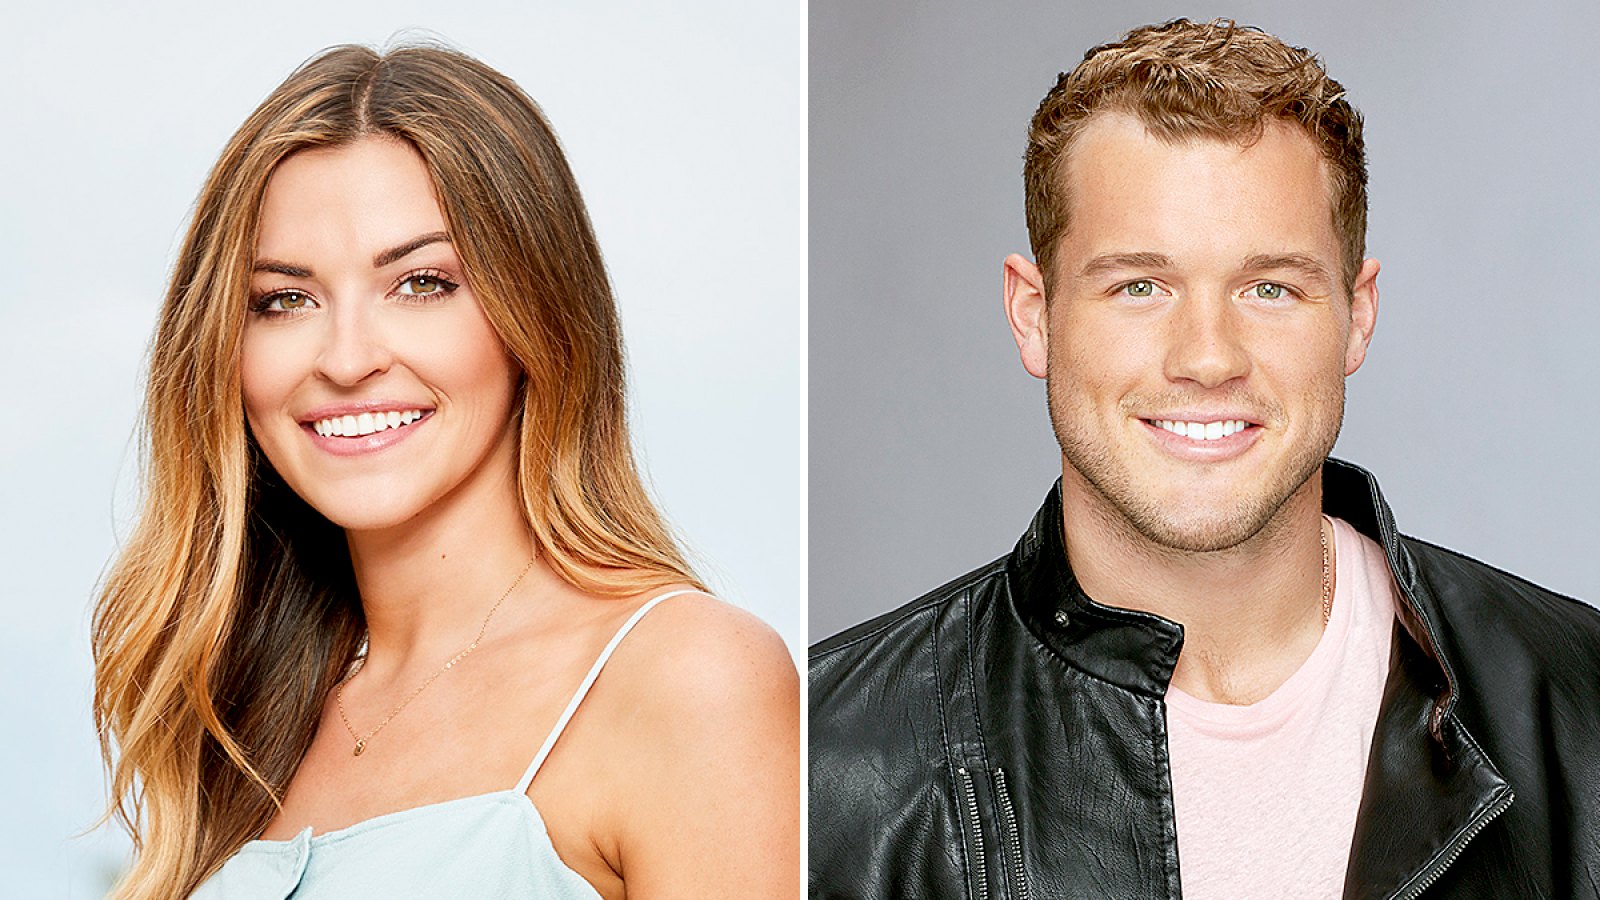 Tia Booth and Colton Underwood